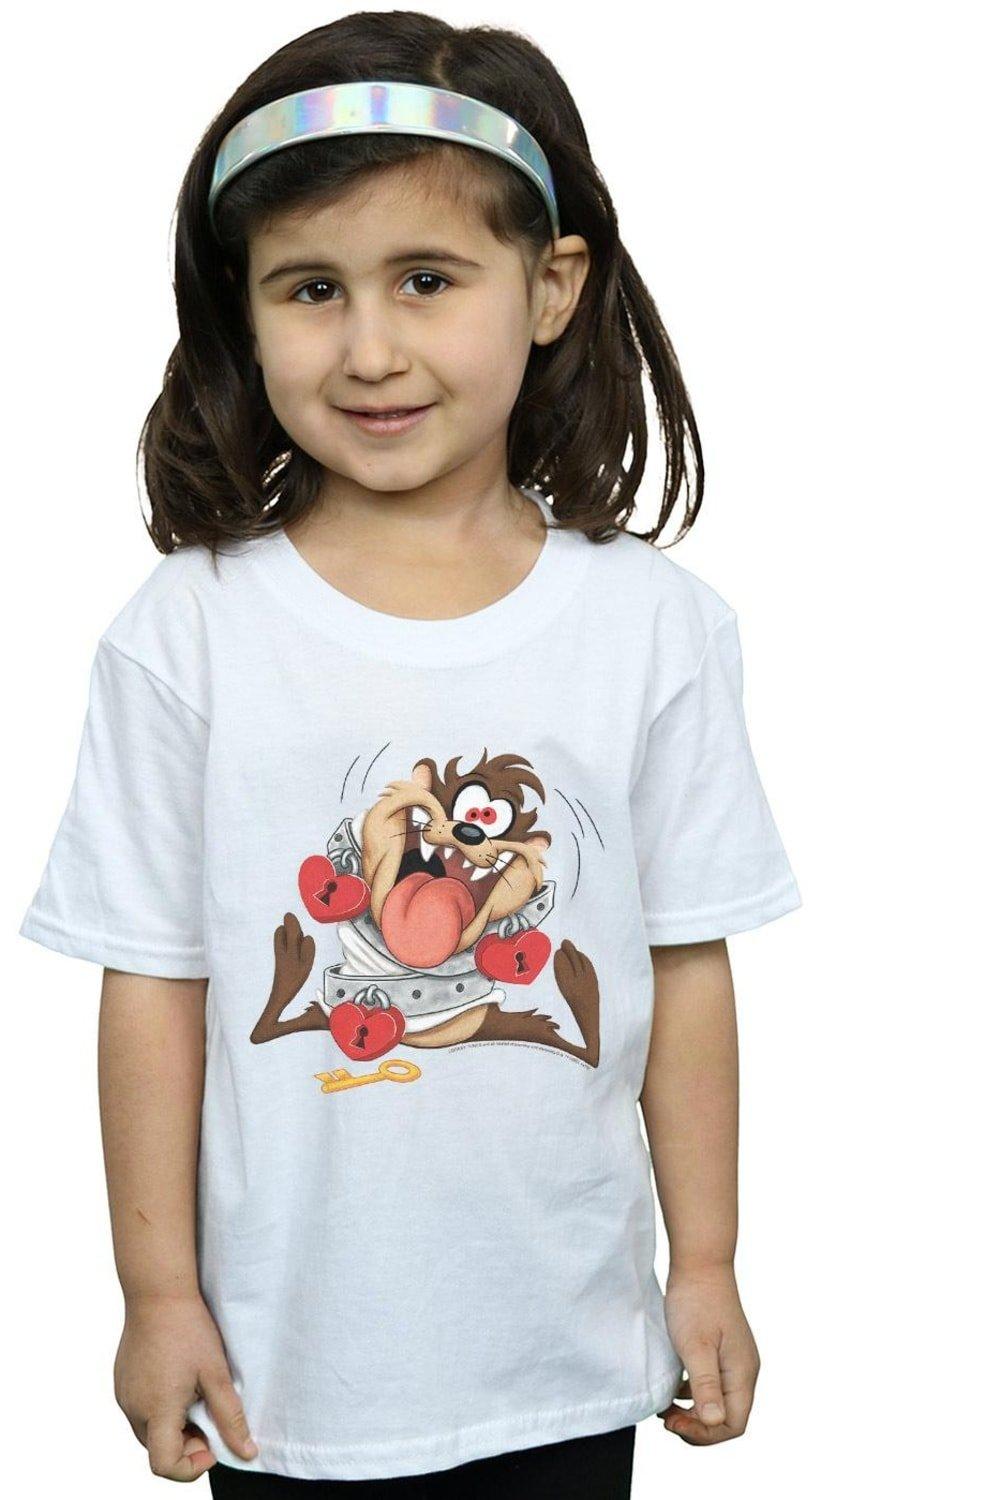 Taz Valentine’s Day Madly In Love Cotton T-Shirt